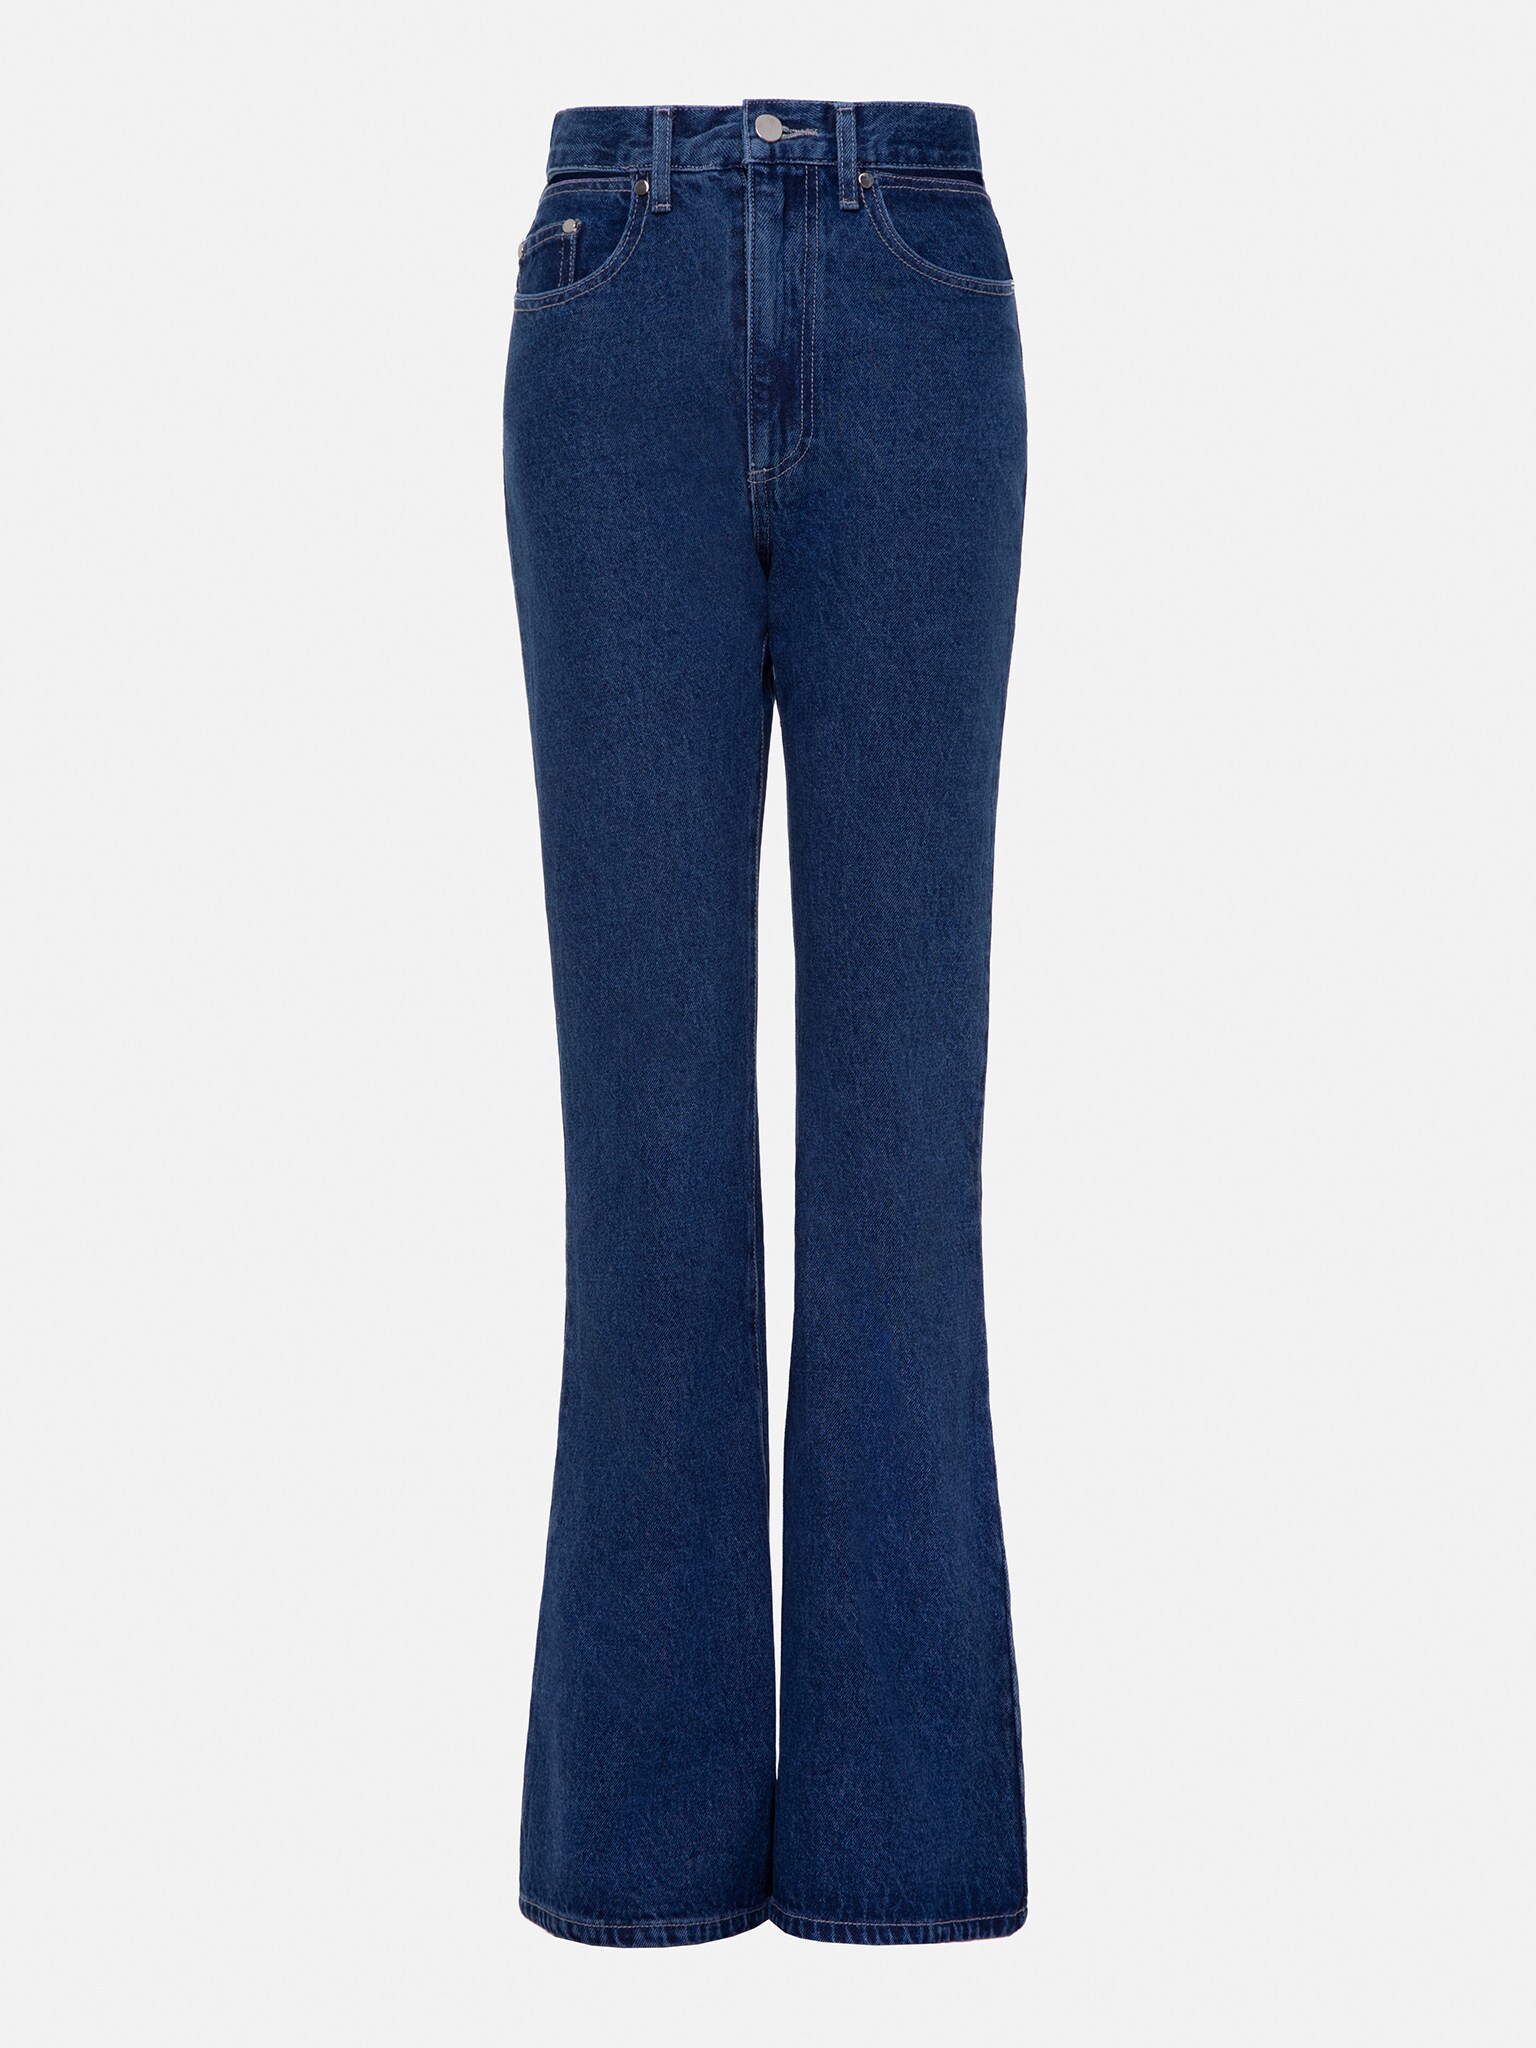 Flared jeans with square-shape pockets :: LICHI - Online fashion store